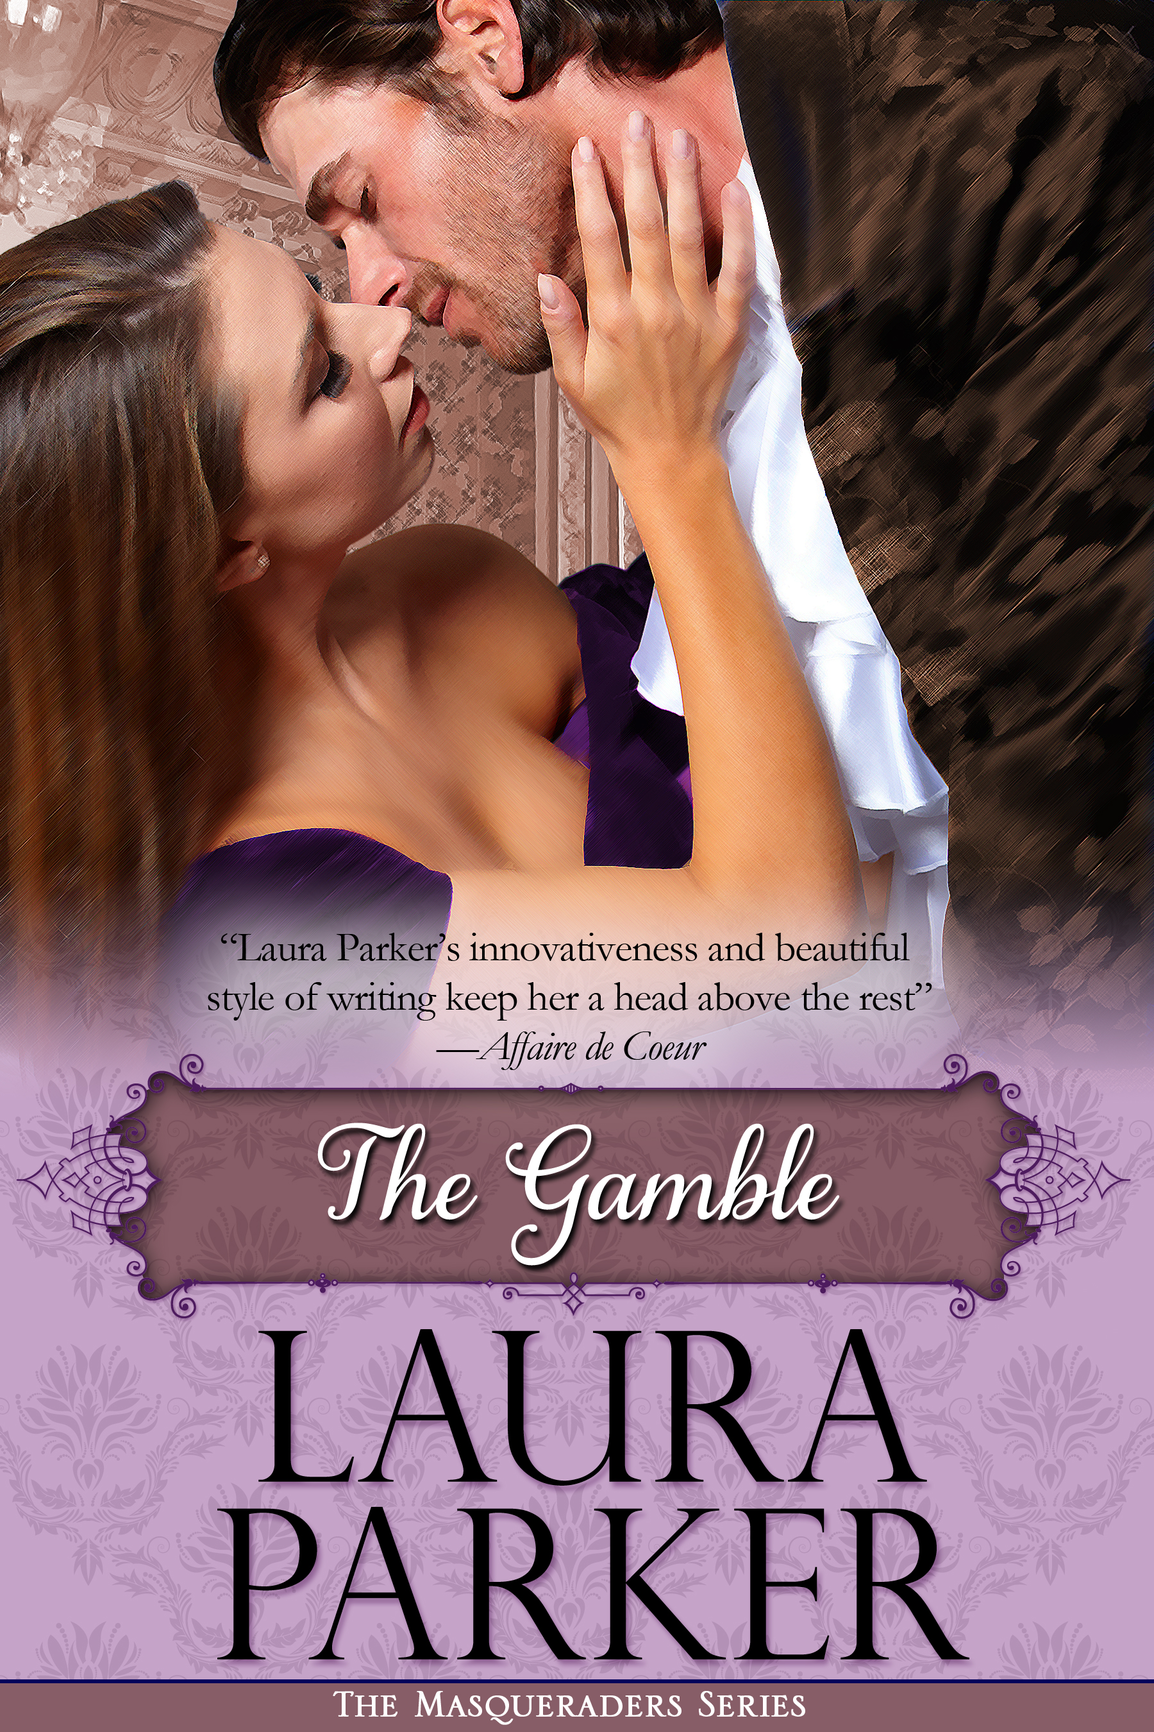 The Gamble (The Masqueraders Series - Book 5)